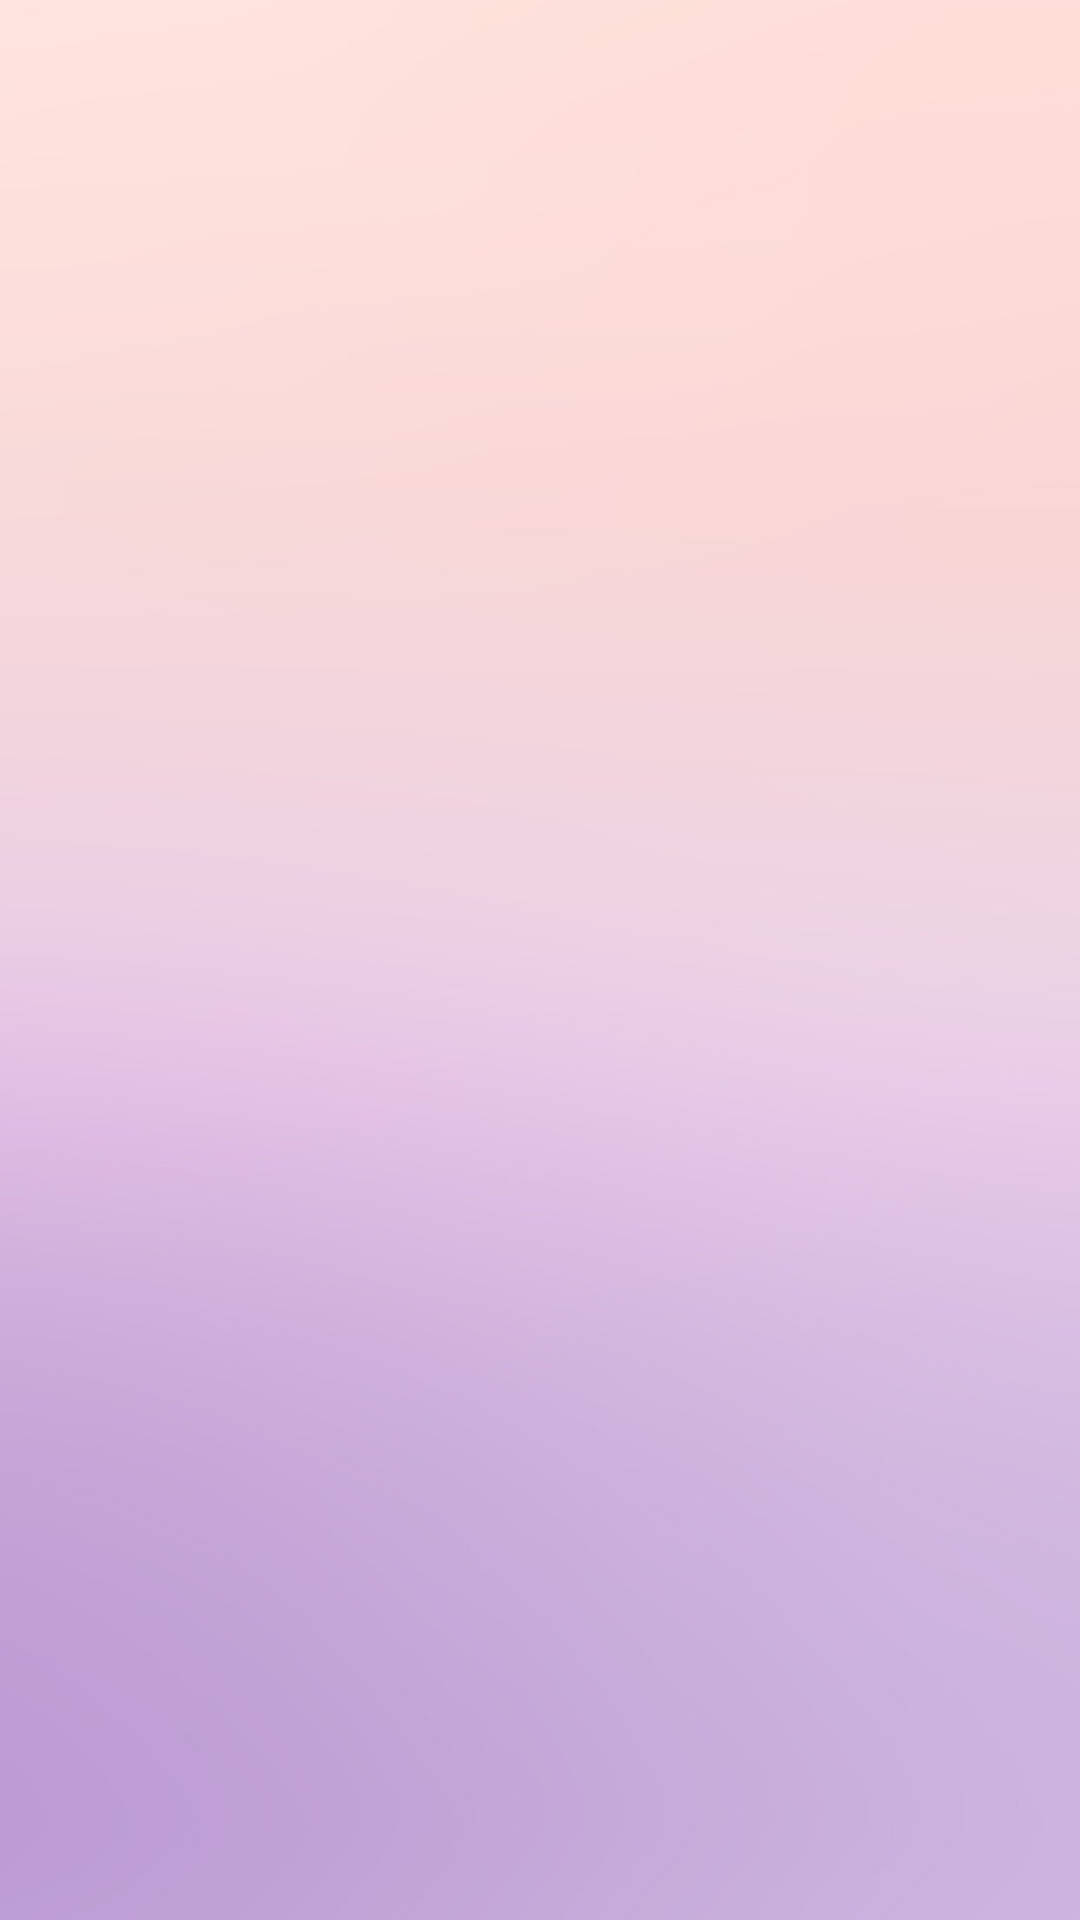 Gradient Pink And Light Purple Iphone Wallpaper